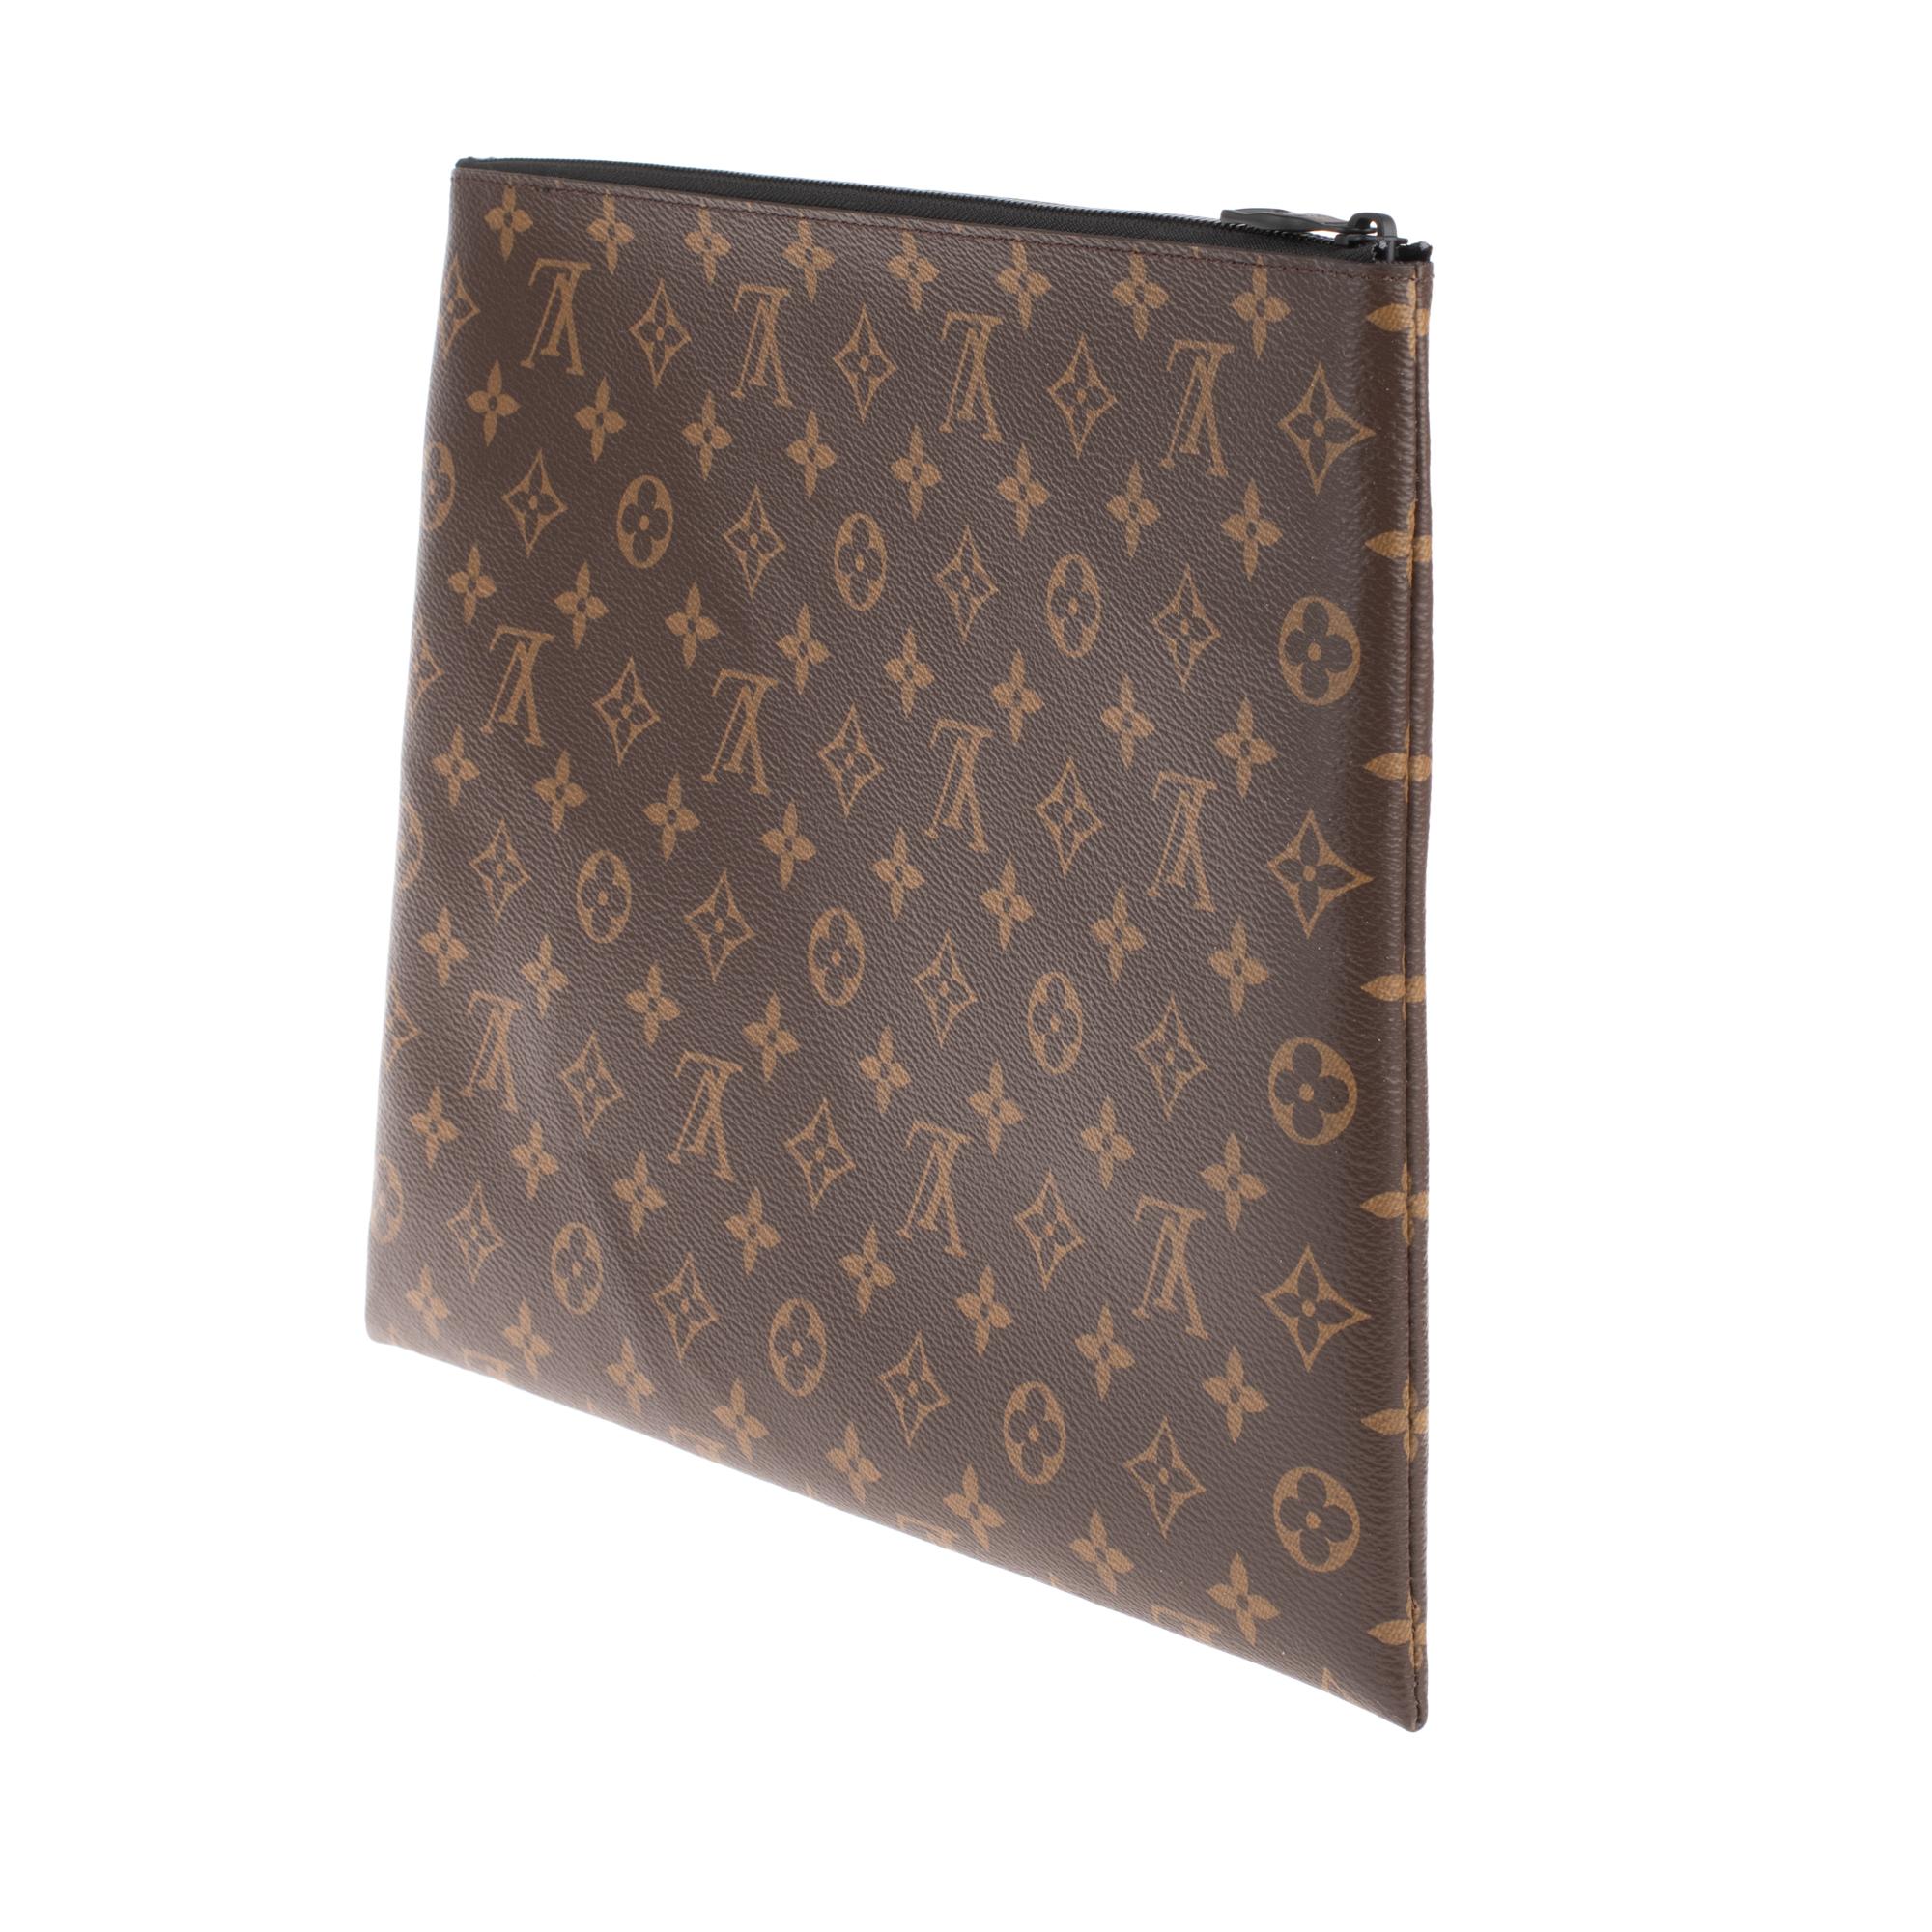 Black Sold Out - Brand new Louis Vuitton Pouch Virgil Abloh limited edition 2019